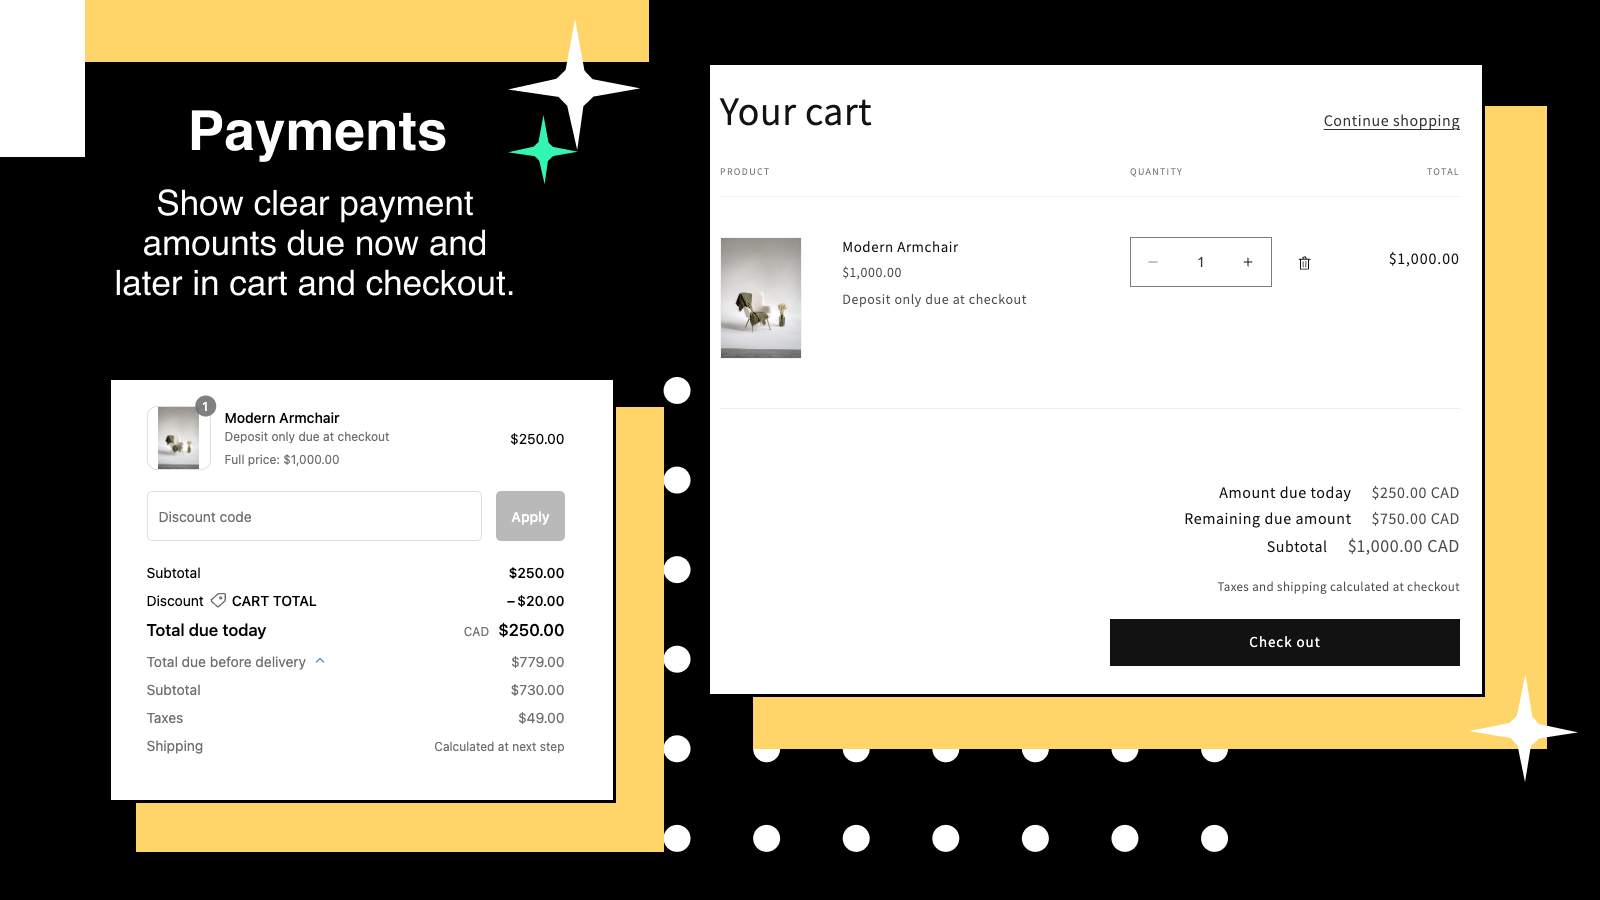 Partial payments cart and checkout